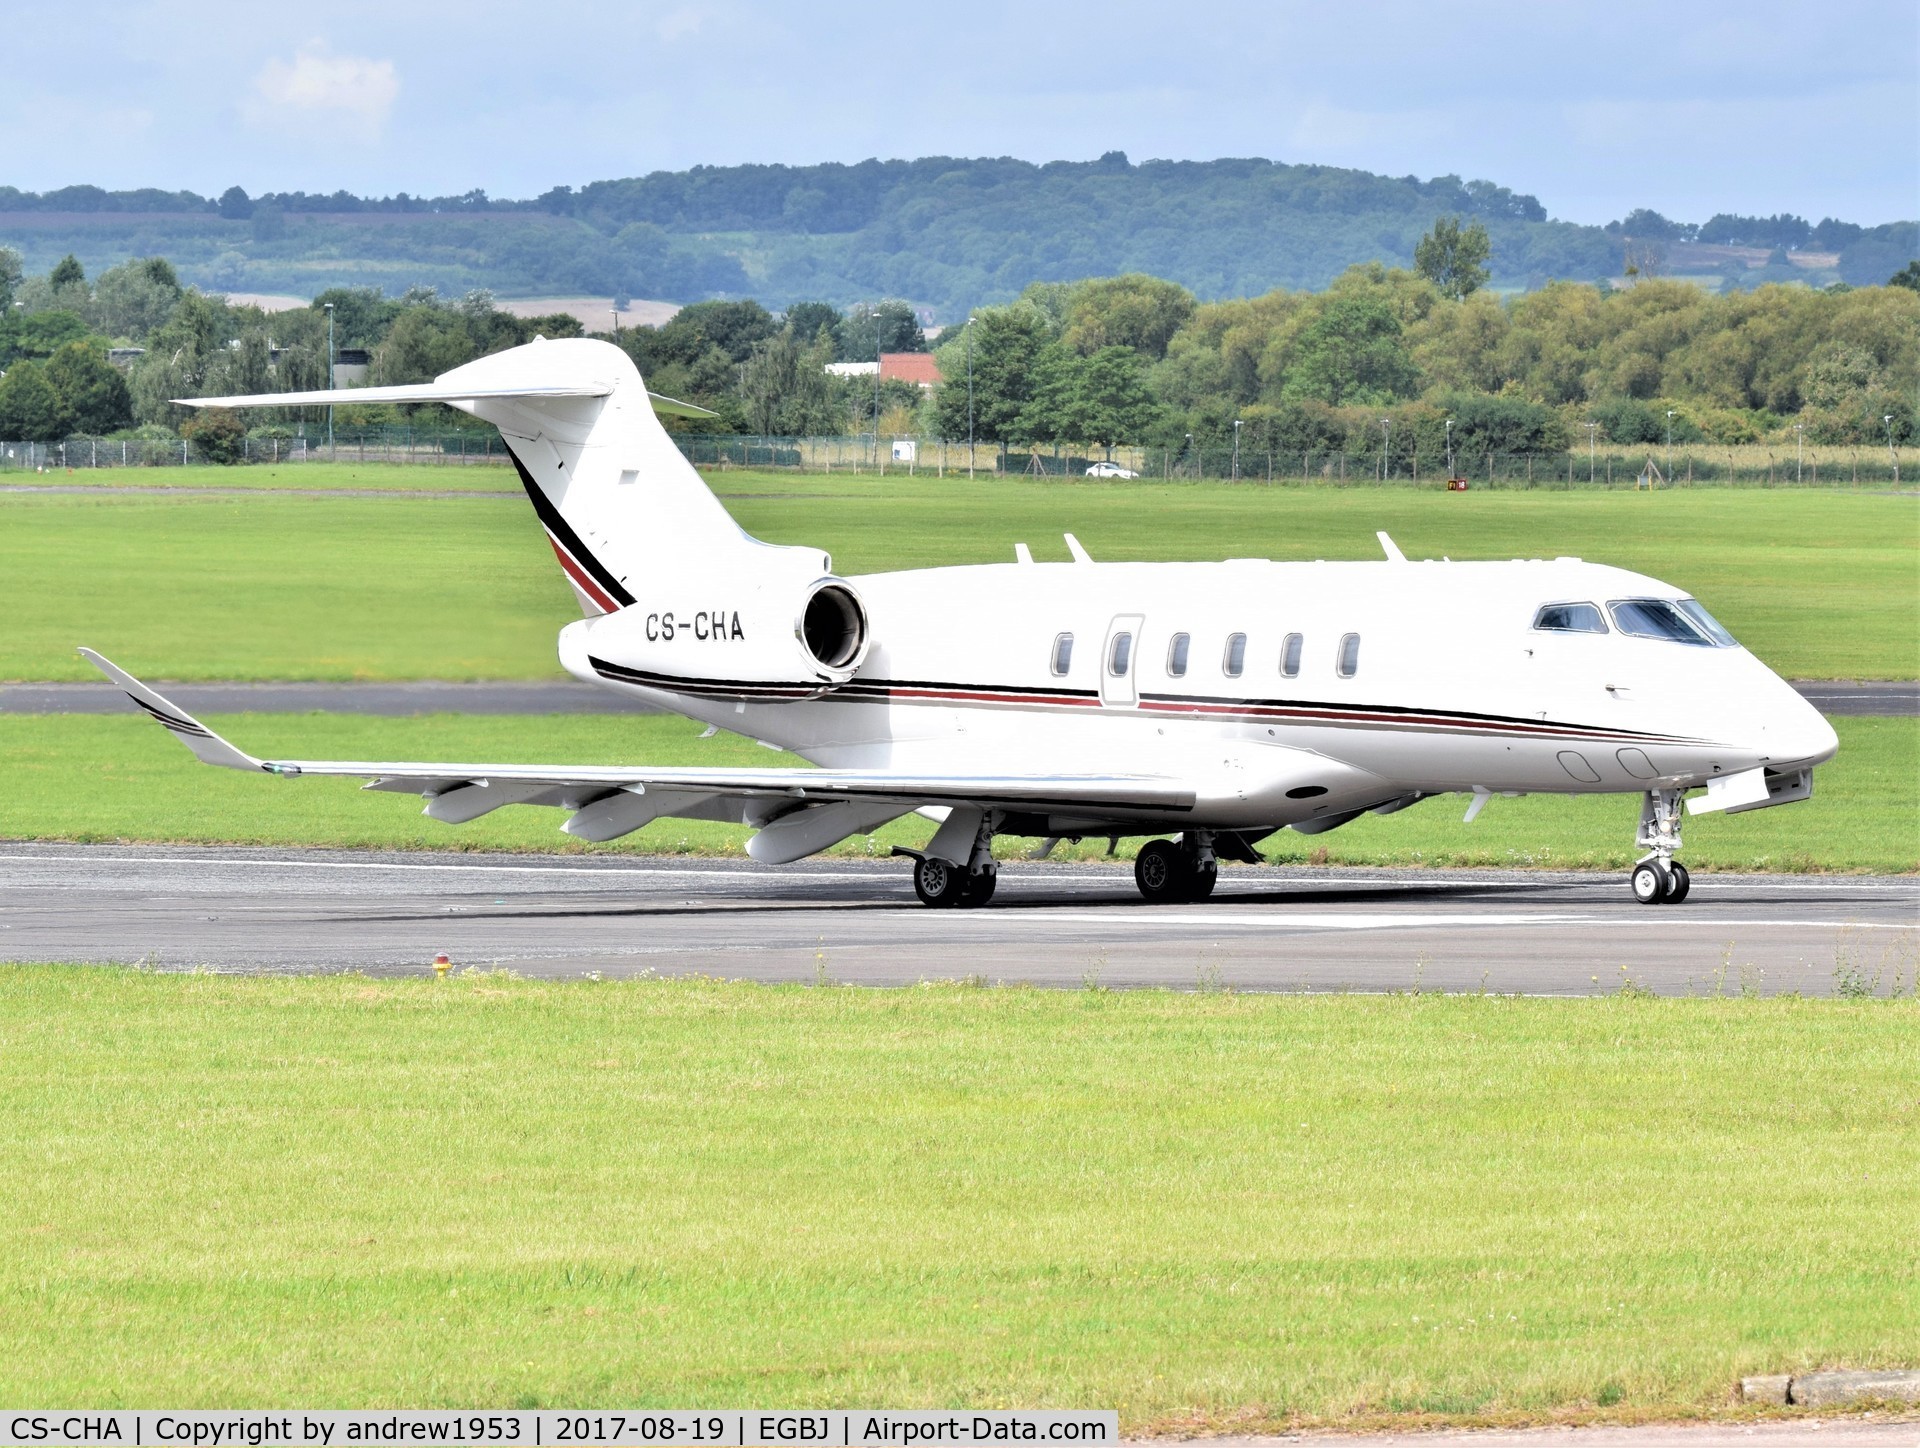 CS-CHA, 2014 Bombardier Challenger 350 (BD-100-1A10) C/N 20544, CS-CHA at Gloucestershire Airport.